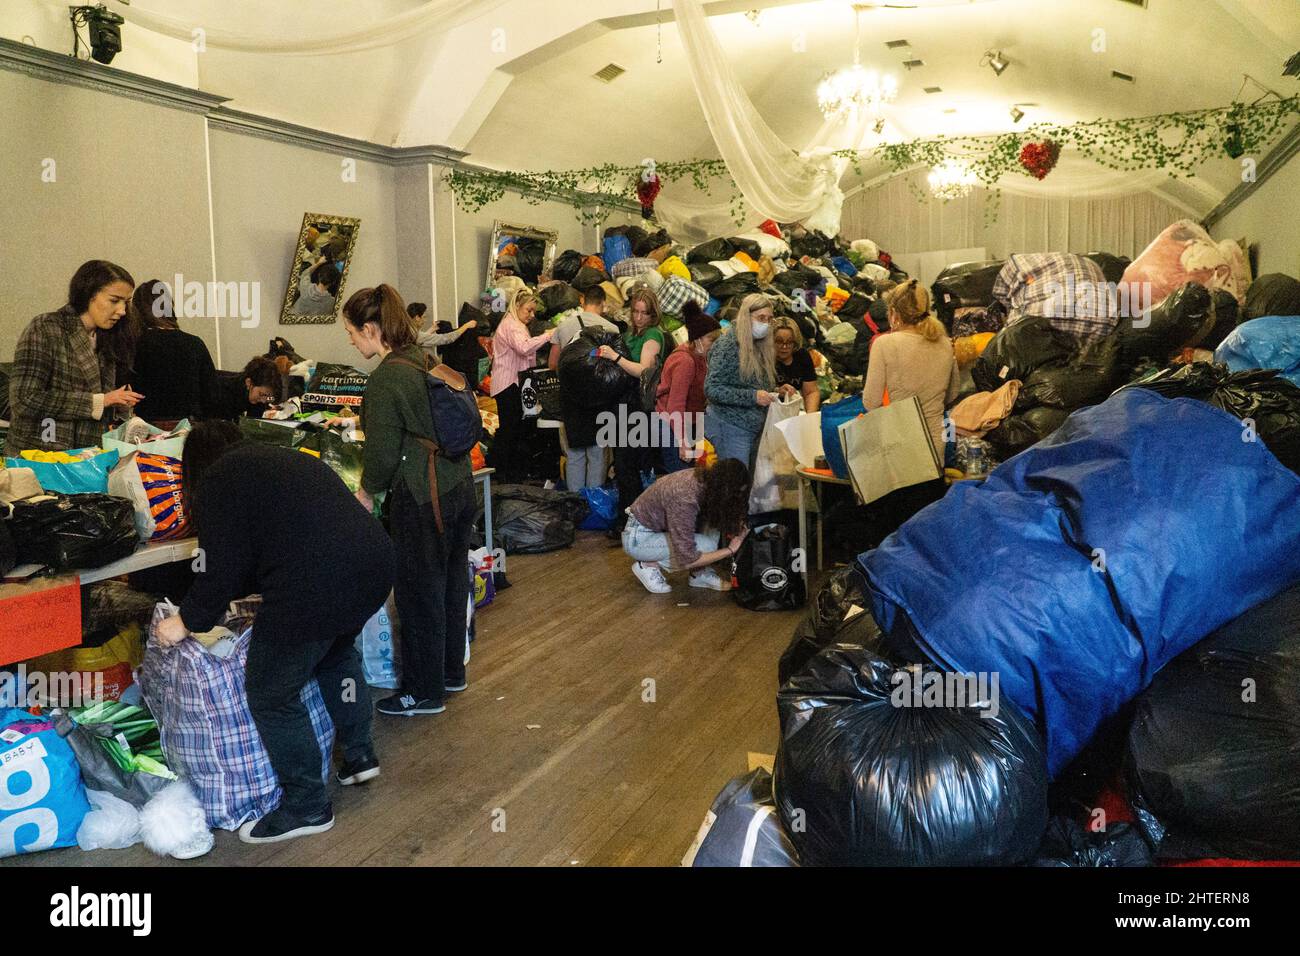 London, UK, 28 February 2021: Aid donations for Ukranian refugees are gathered at the White Eagle Club, a Polish community centre in Balham. Huge quantities have been donated and are being sorted by volunteers and then loaded on to pallets to take on lorries across Europe. Anna Watson/Alamy Live News Stock Photo